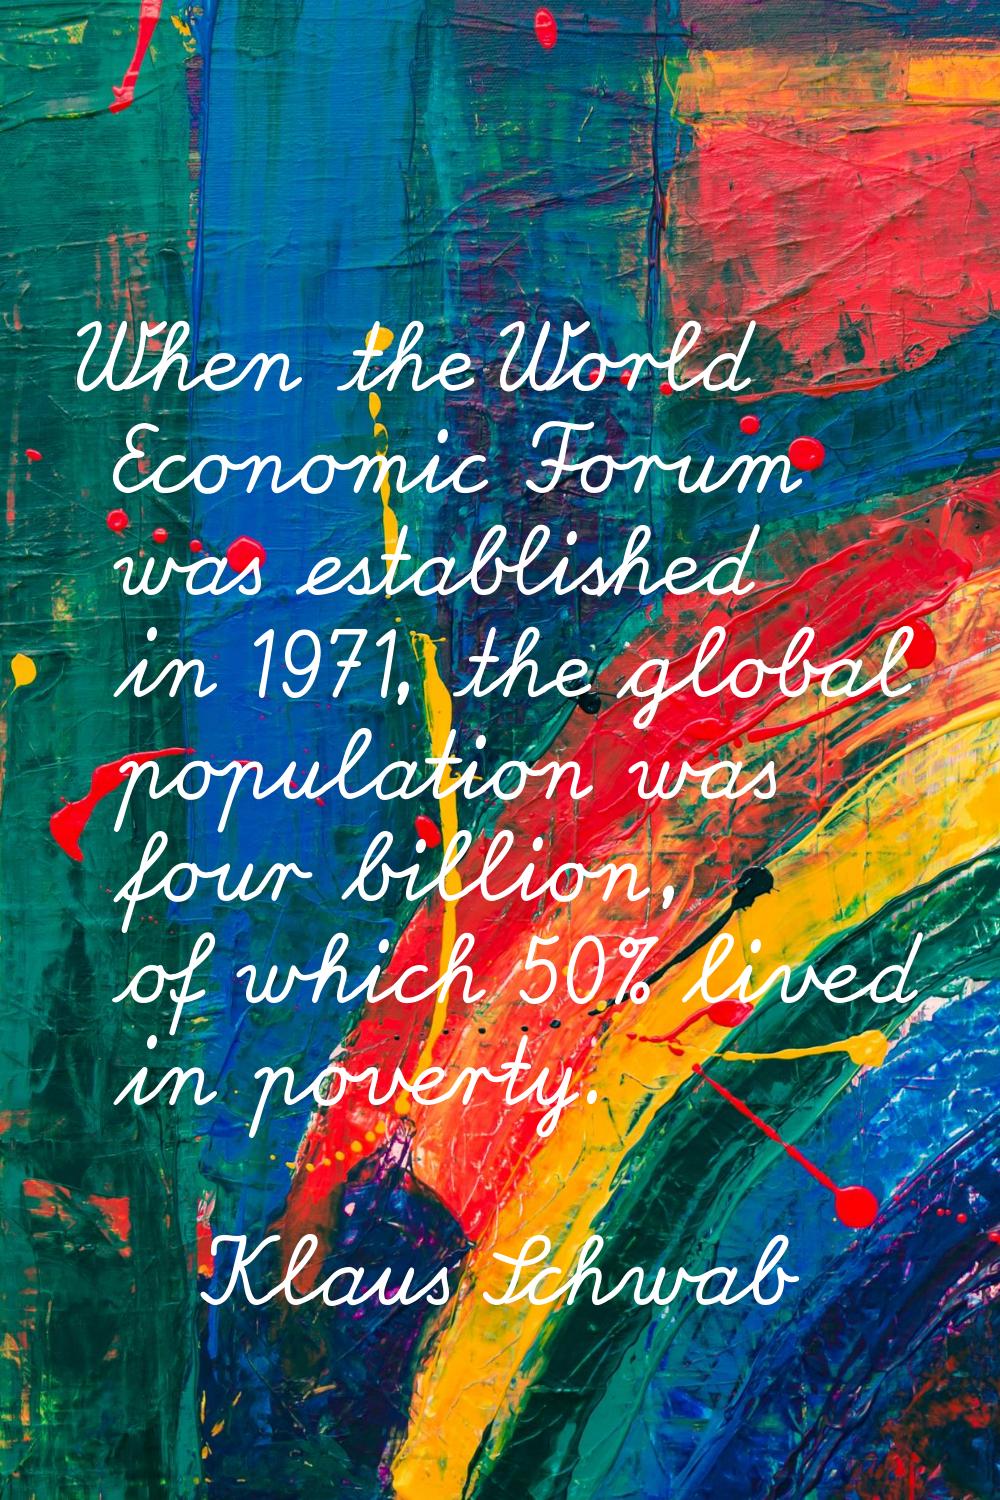 When the World Economic Forum was established in 1971, the global population was four billion, of w